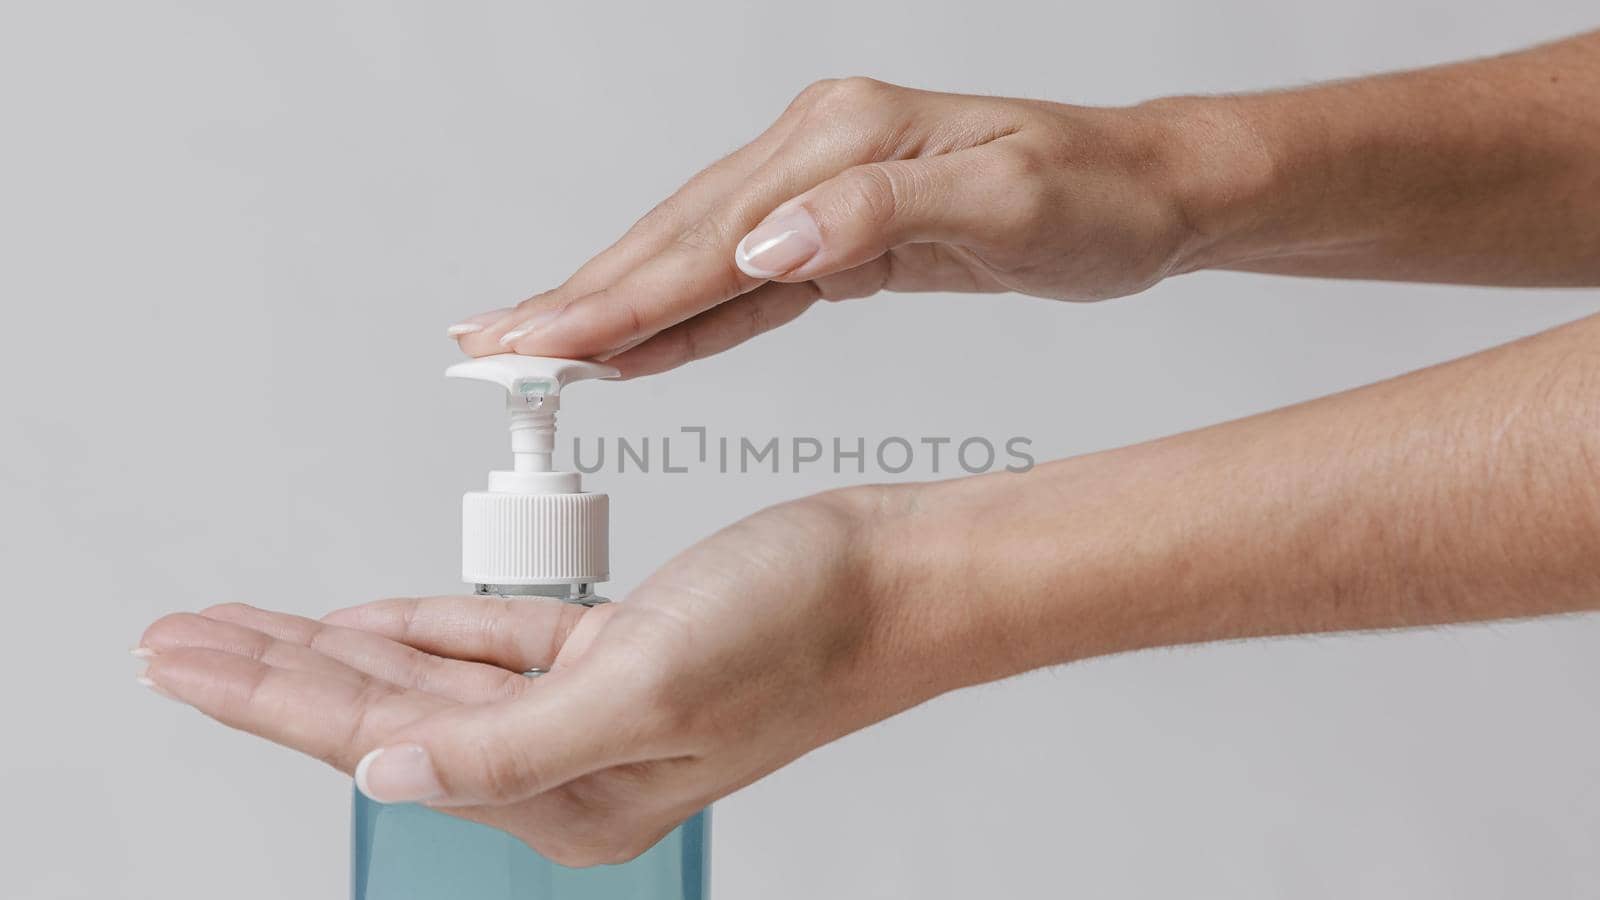 using gel hydroalcoolique hand sanitizer. Resolution and high quality beautiful photo